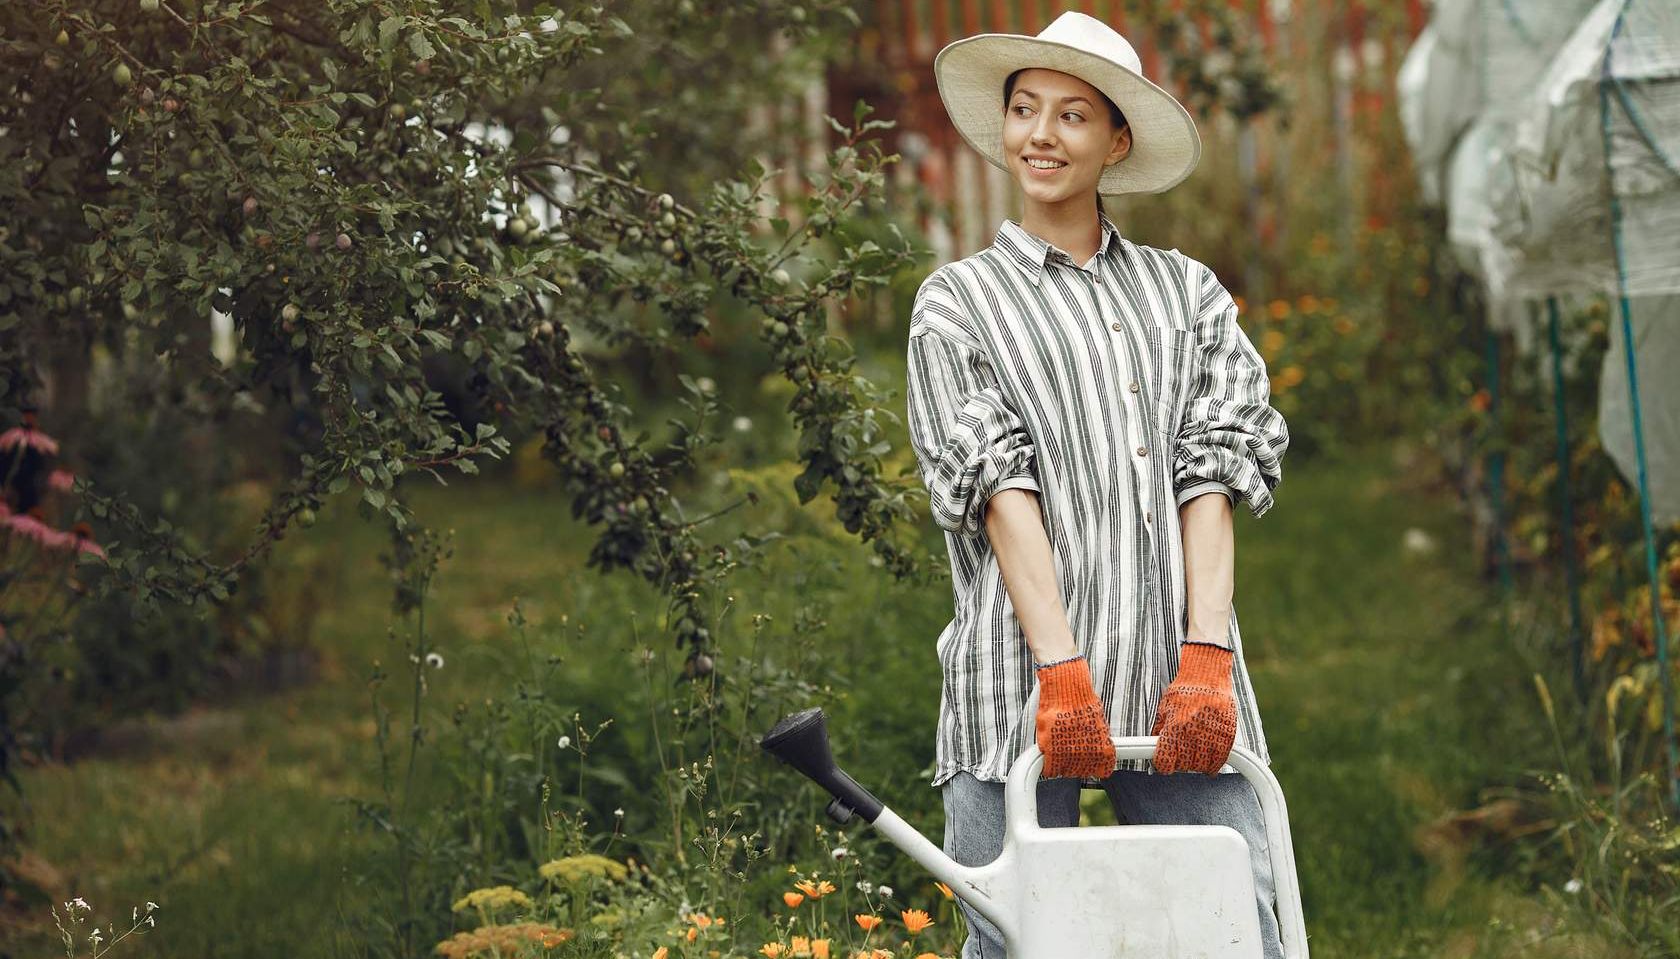 a woman wearing a hat and gloves holding a watering can